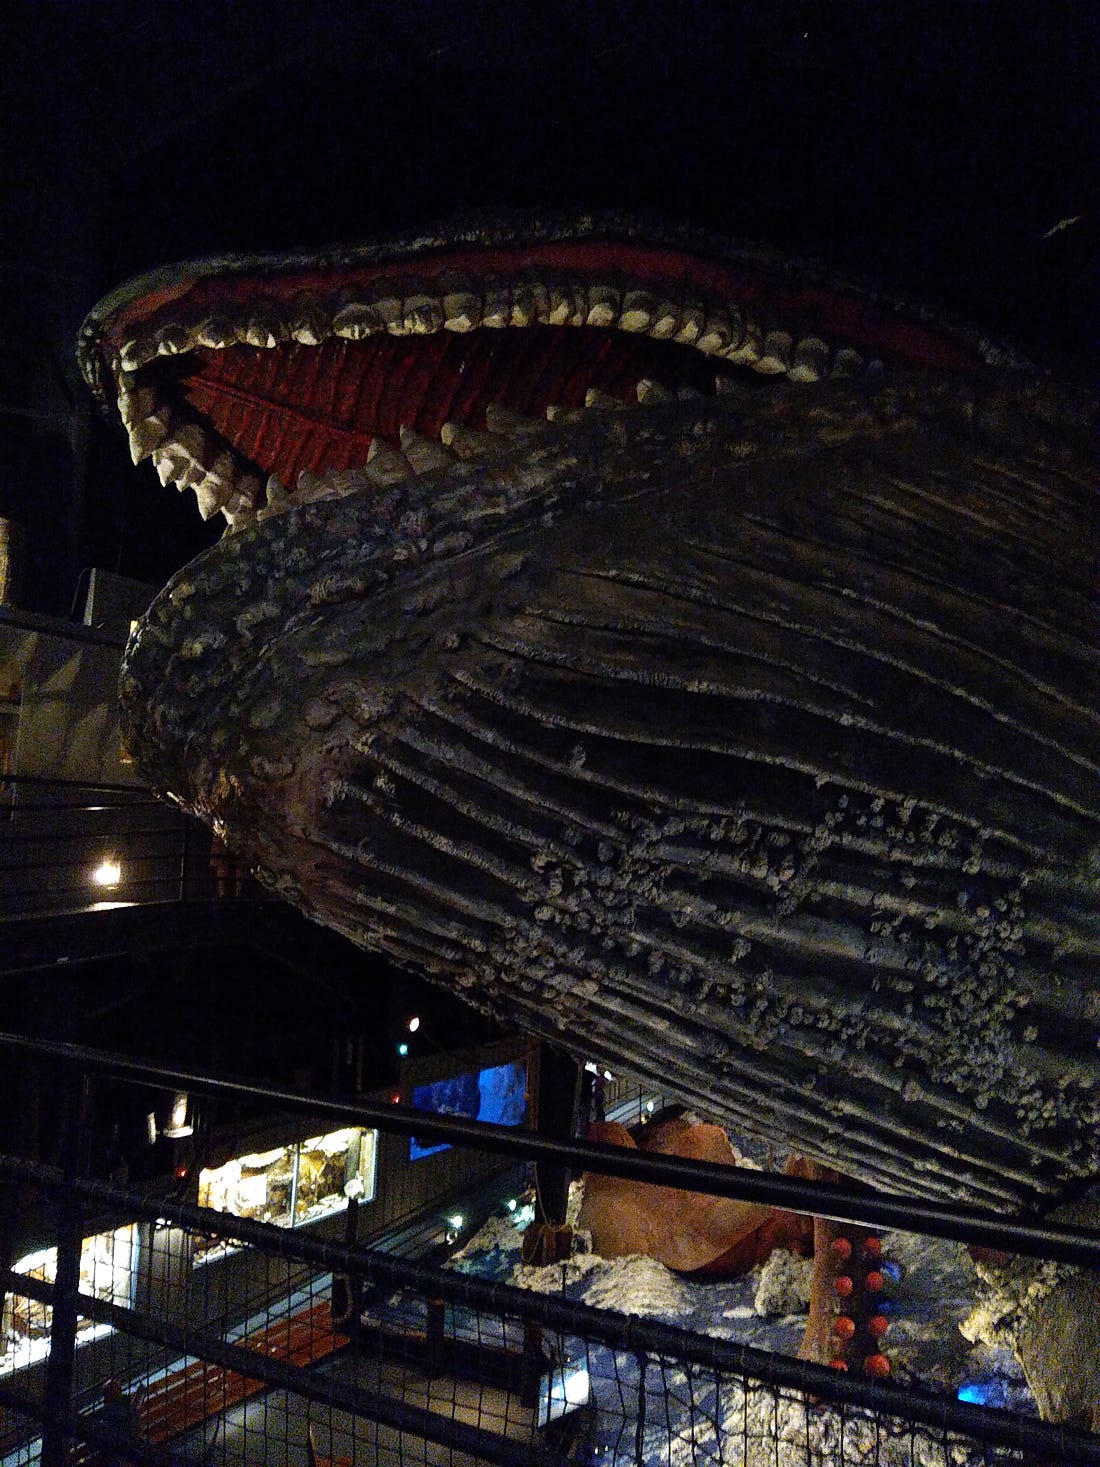 Massive model of whale view of open mouth